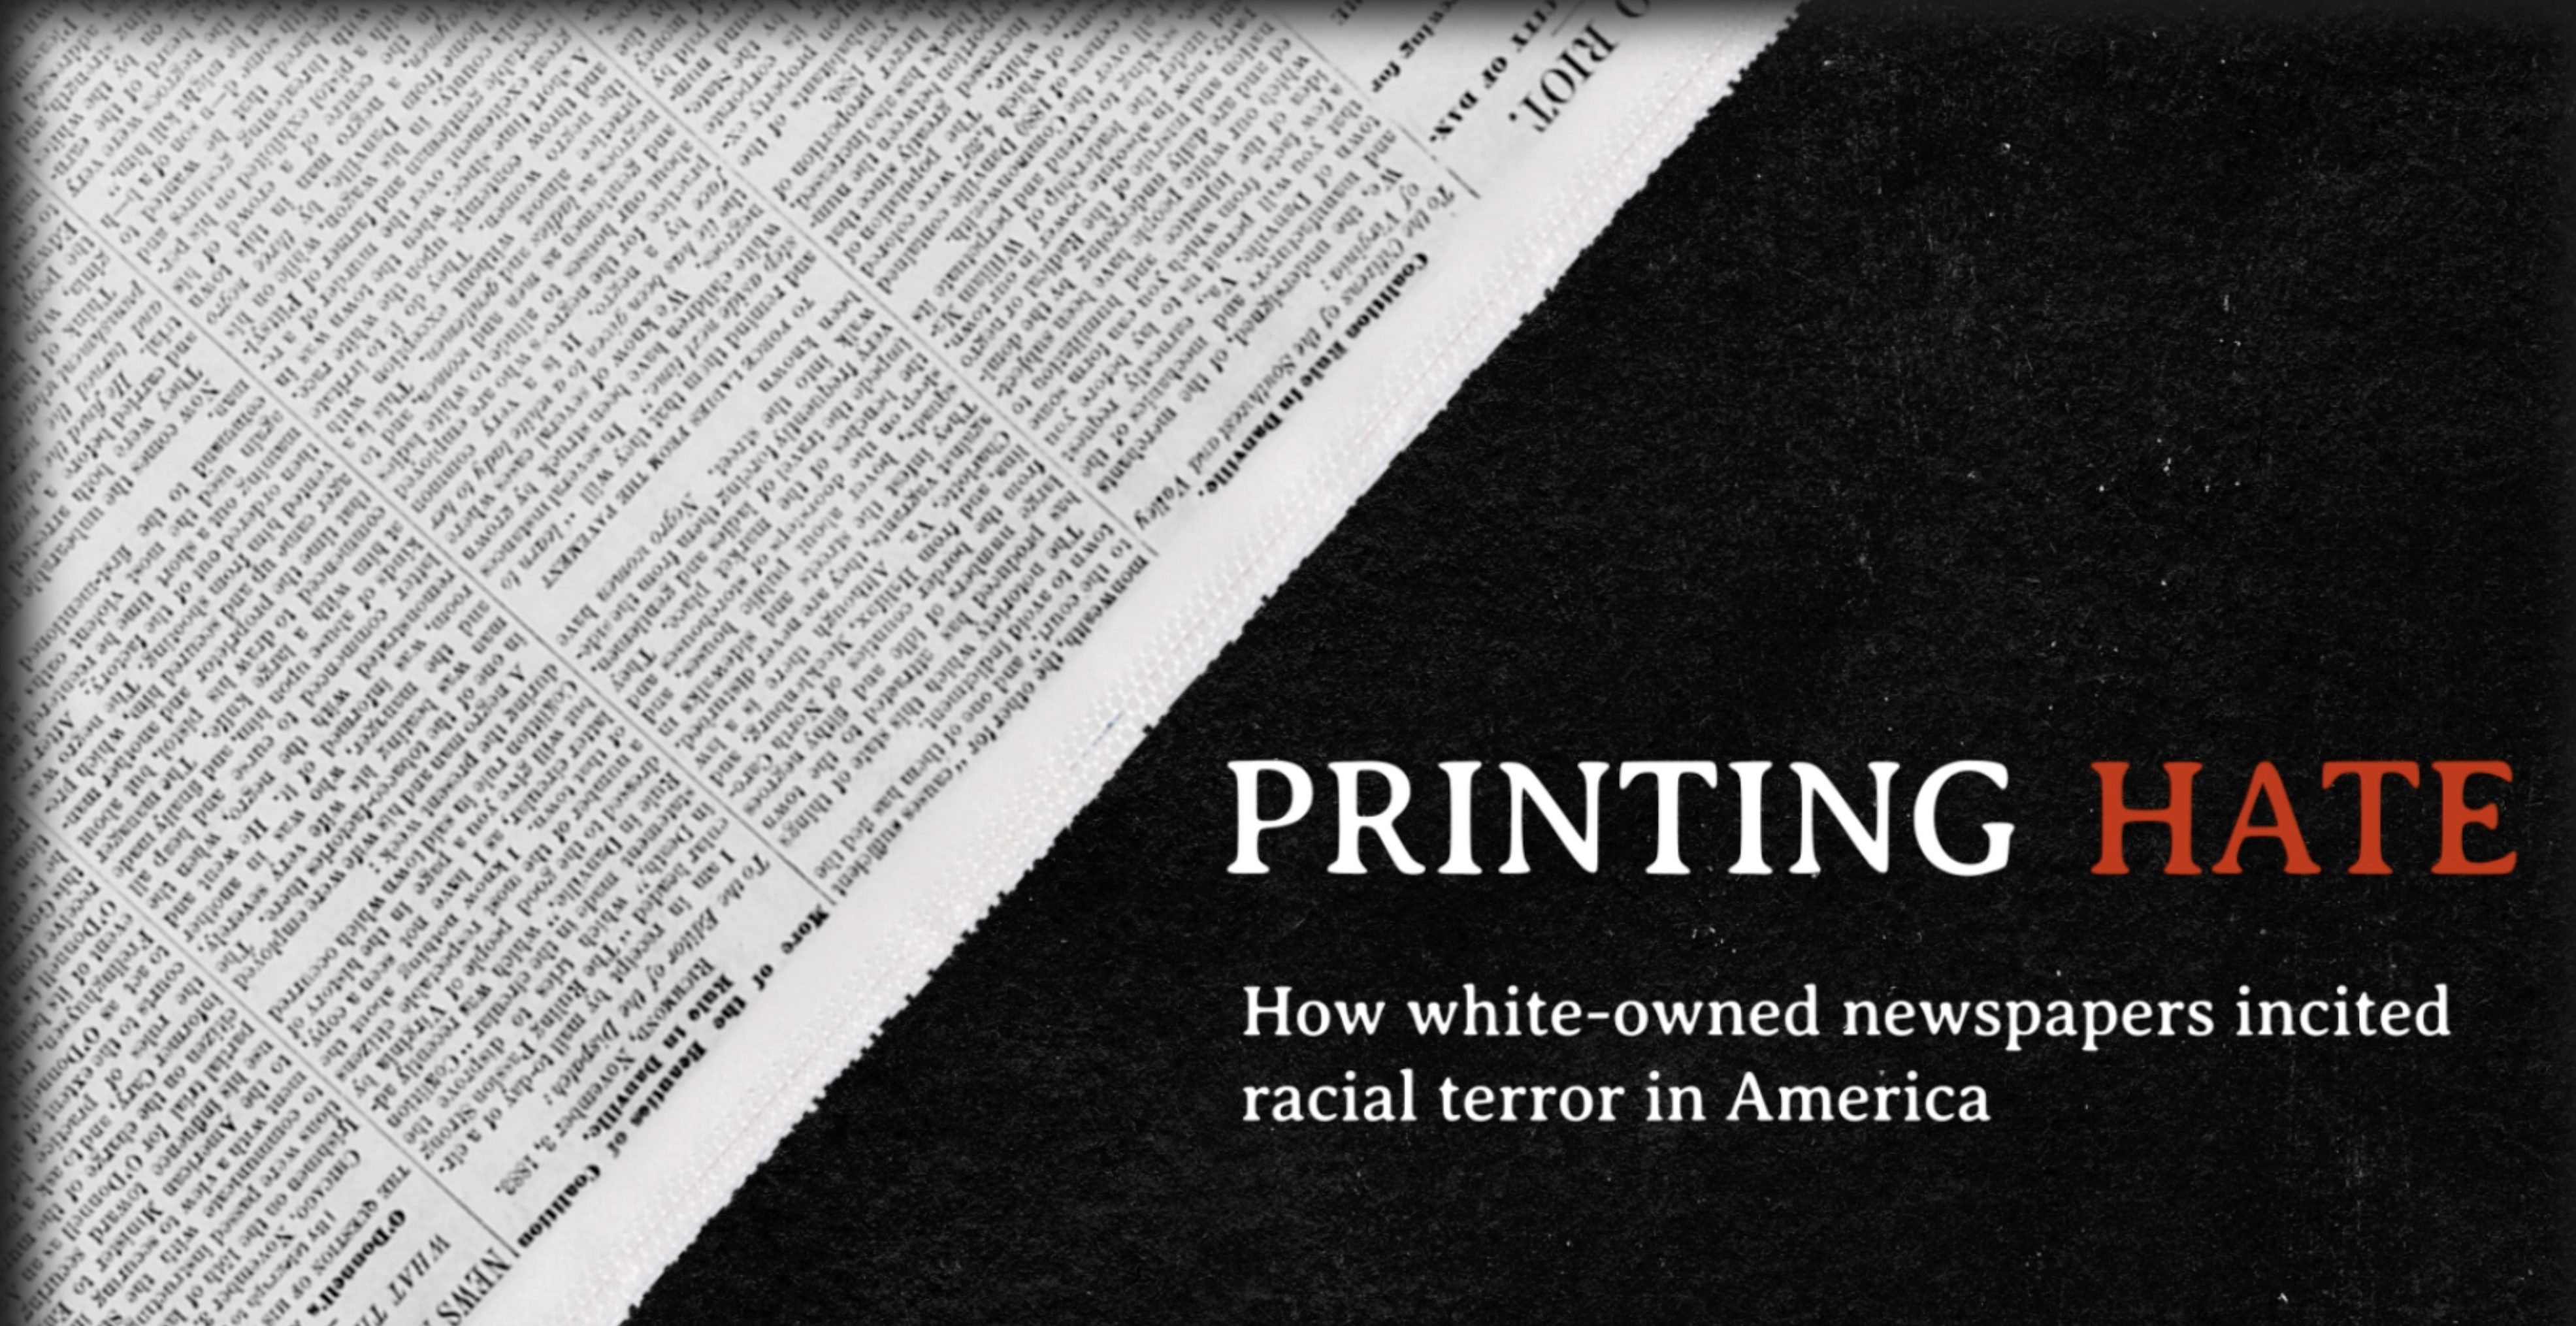 Printing Hate: How white-owned newspapers incited racial terror in America